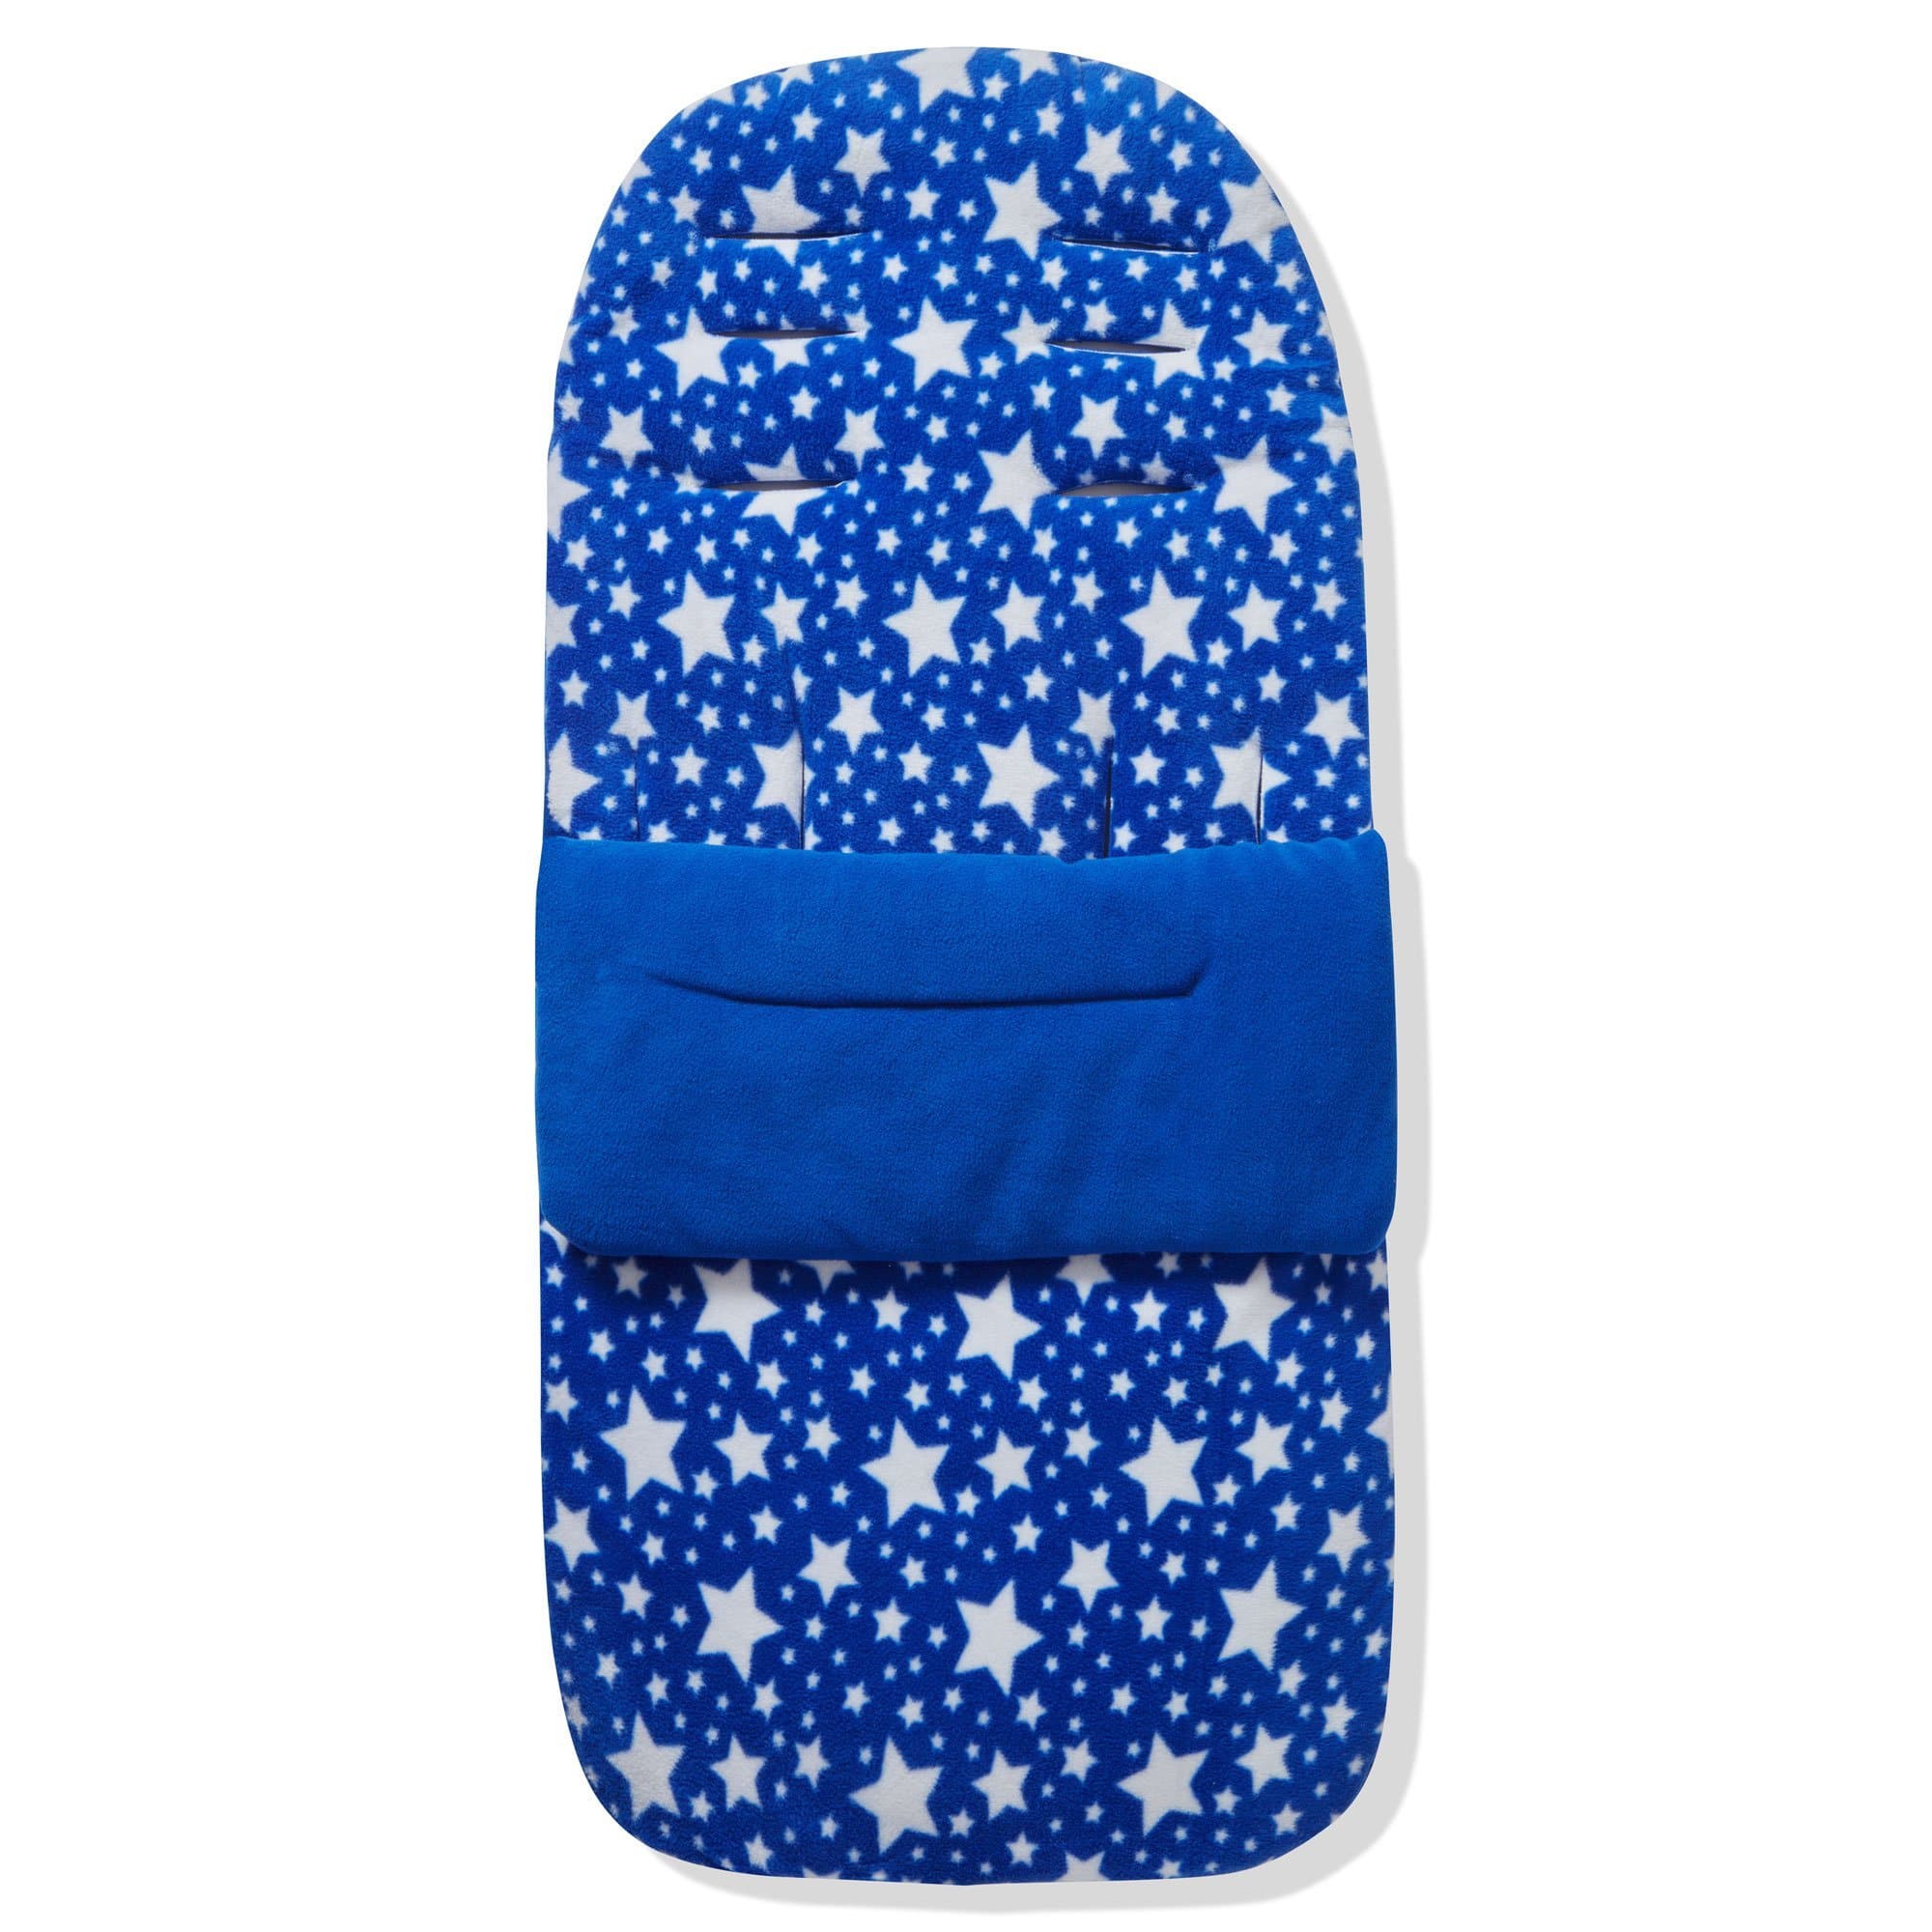 Fleece Footmuff / Cosy Toes Compatible with Esprit - Blue Star / Fits All Models | For Your Little One